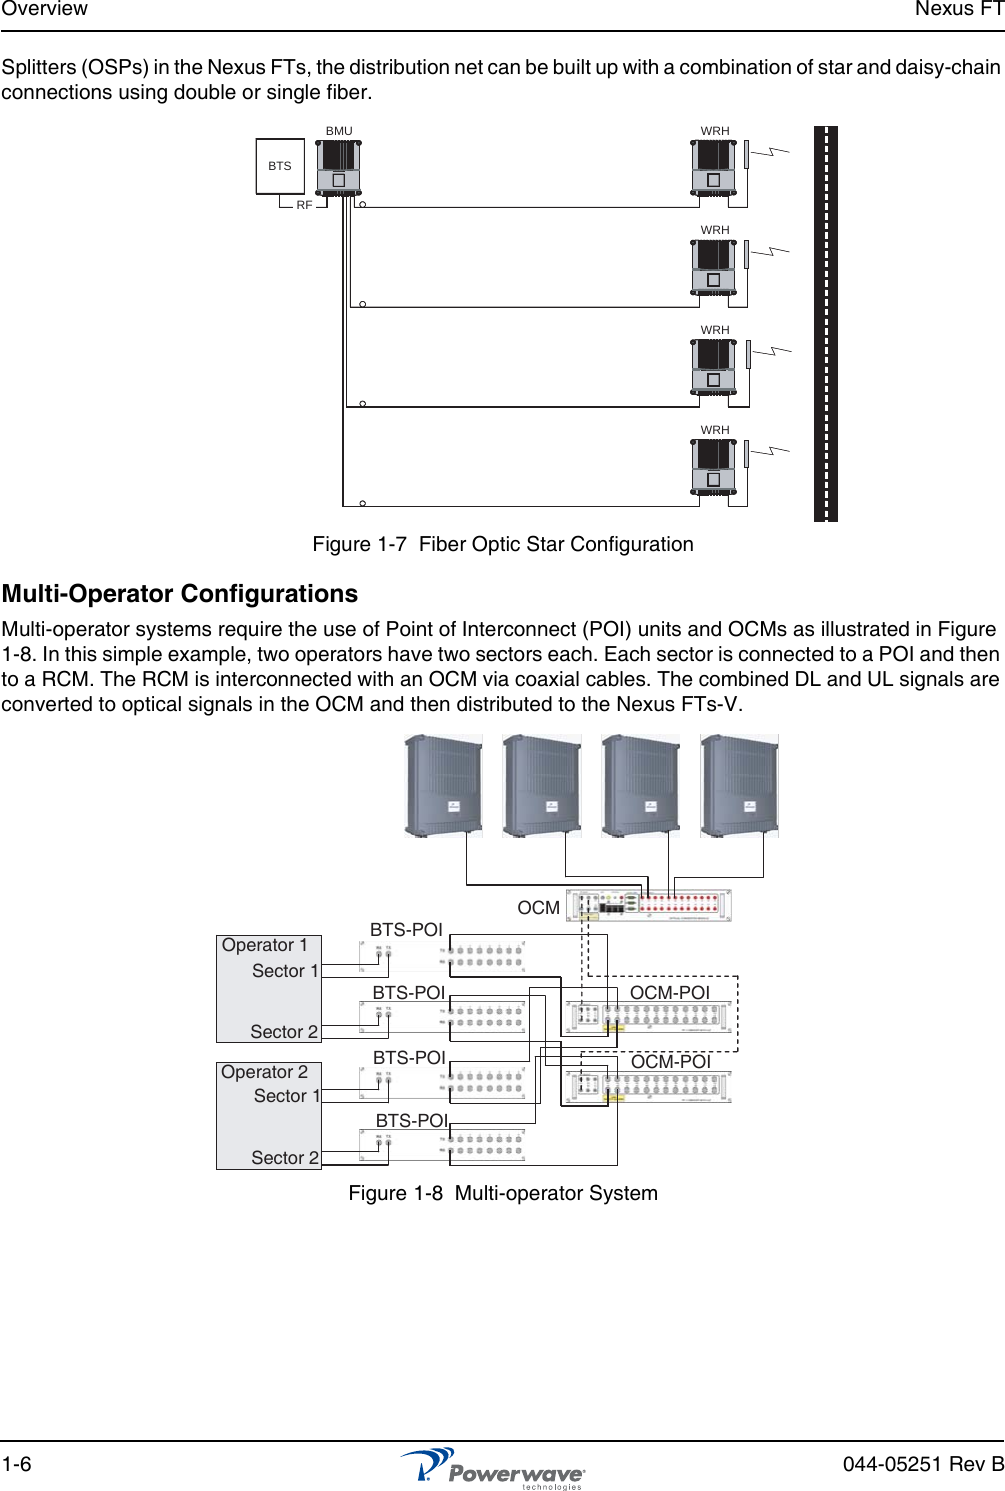 Overview Nexus FT1-6 044-05251 Rev BSplitters (OSPs) in the Nexus FTs, the distribution net can be built up with a combination of star and daisy-chain connections using double or single fiber.Figure 1-7  Fiber Optic Star ConfigurationMulti-Operator ConfigurationsMulti-operator systems require the use of Point of Interconnect (POI) units and OCMs as illustrated in Figure 1-8. In this simple example, two operators have two sectors each. Each sector is connected to a POI and then to a RCM. The RCM is interconnected with an OCM via coaxial cables. The combined DL and UL signals are converted to optical signals in the OCM and then distributed to the Nexus FTs-V.Figure 1-8  Multi-operator SystemBMU WRHWRHWRHWRHBTS RF  Operator 1 Operator 2 Sector 1 Sector 1 Sector 2 Sector 2 OCM OCM-POI BTS-POI BTS-POIBTS-POIBTS-POIOCM-POI